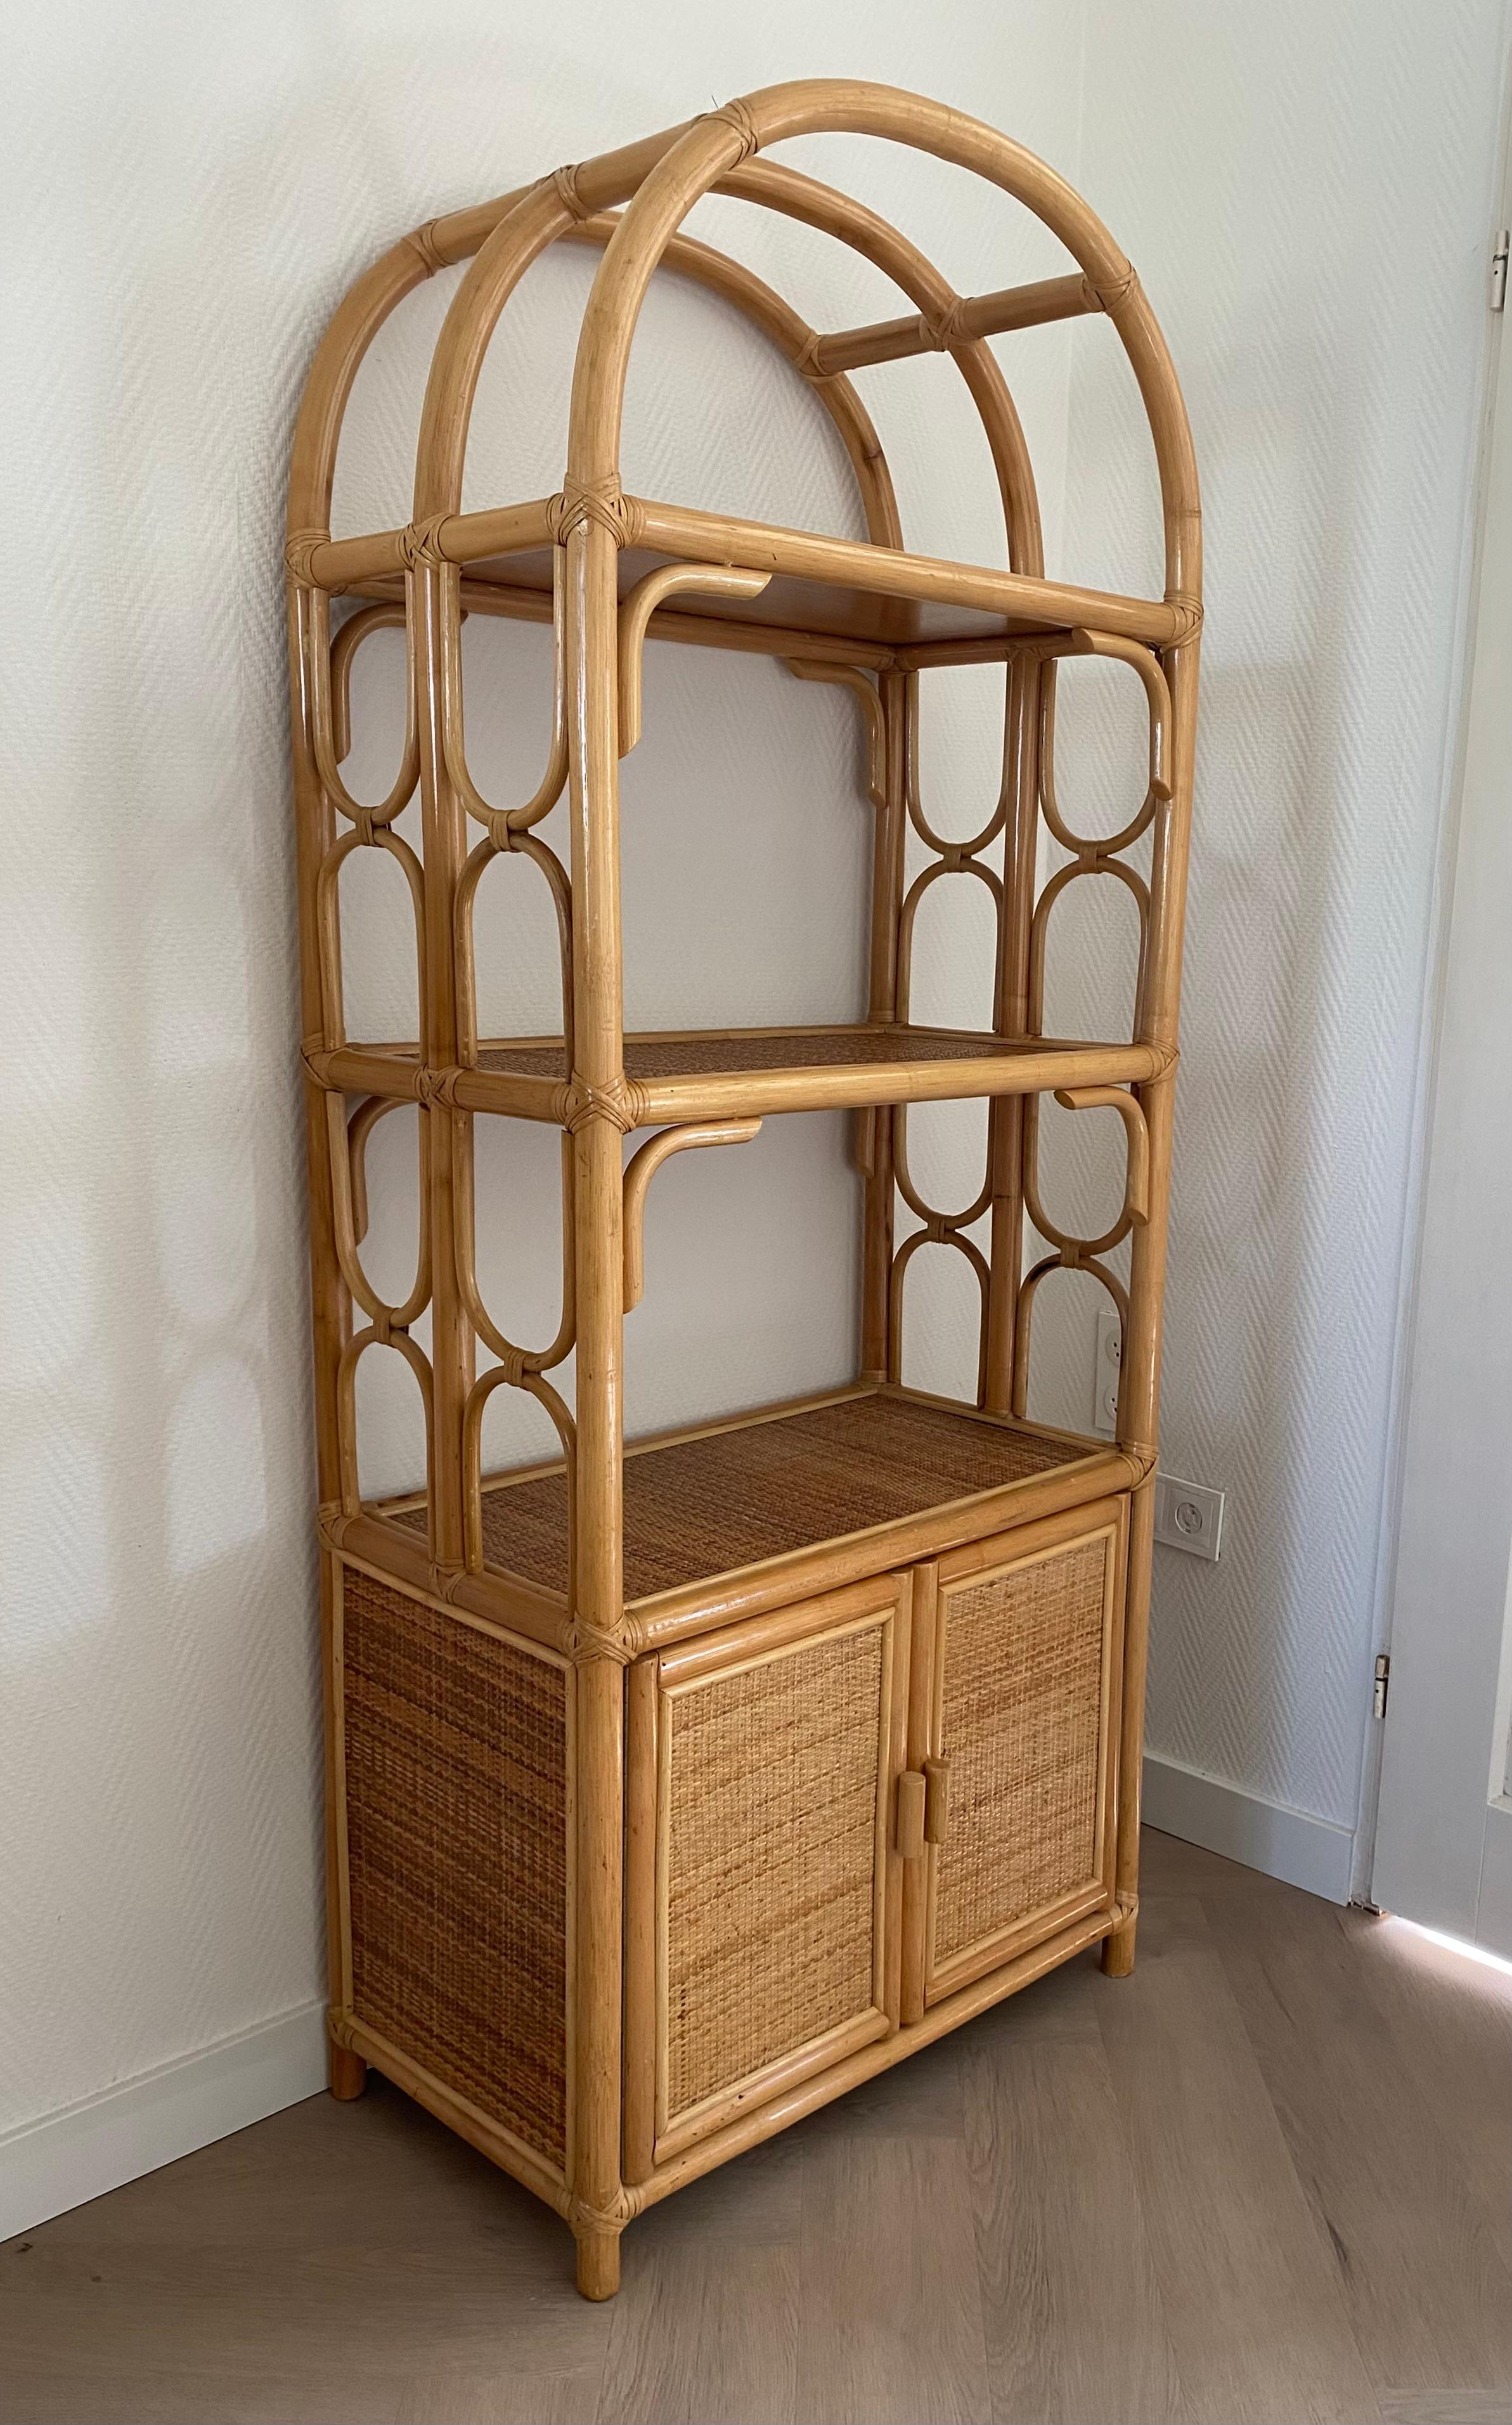 Bohemian Vintage Rattan Boho Chic Bookcase, Cabinet with doors Ca. 1970s For Sale